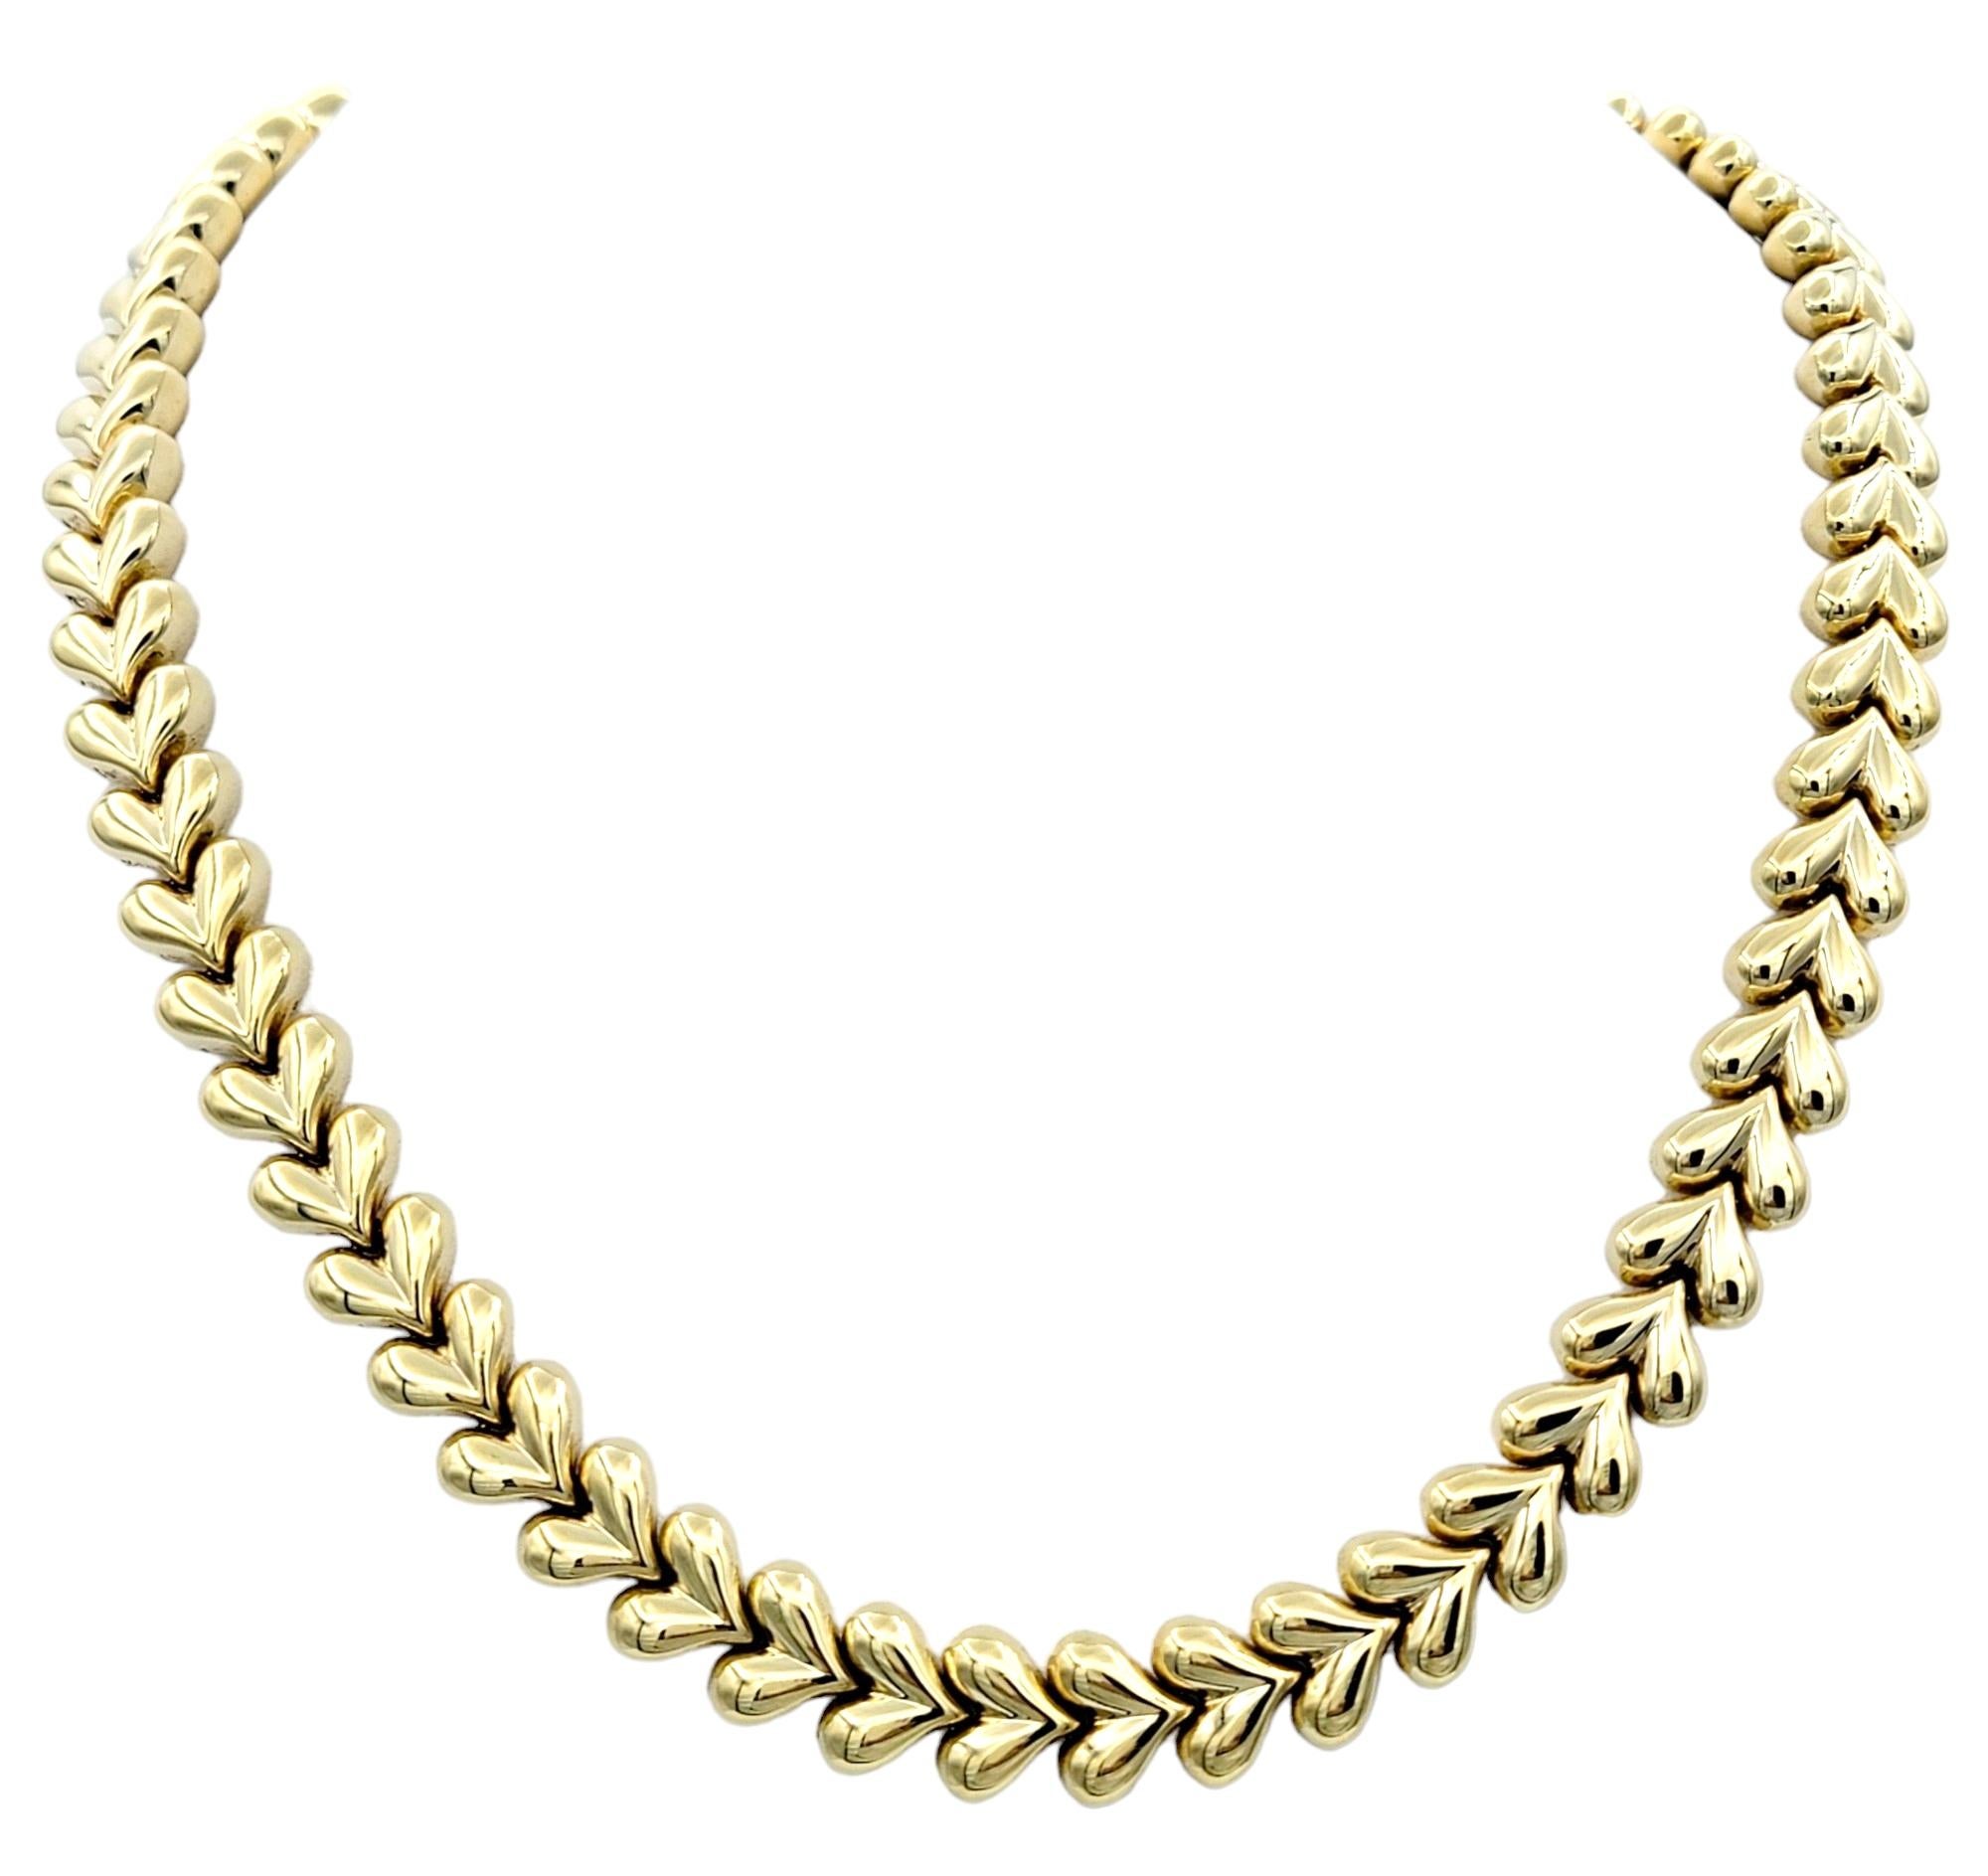 Contemporary Chunky Heart Link Chain Necklace in Polished 14 Karat Yellow Gold For Sale